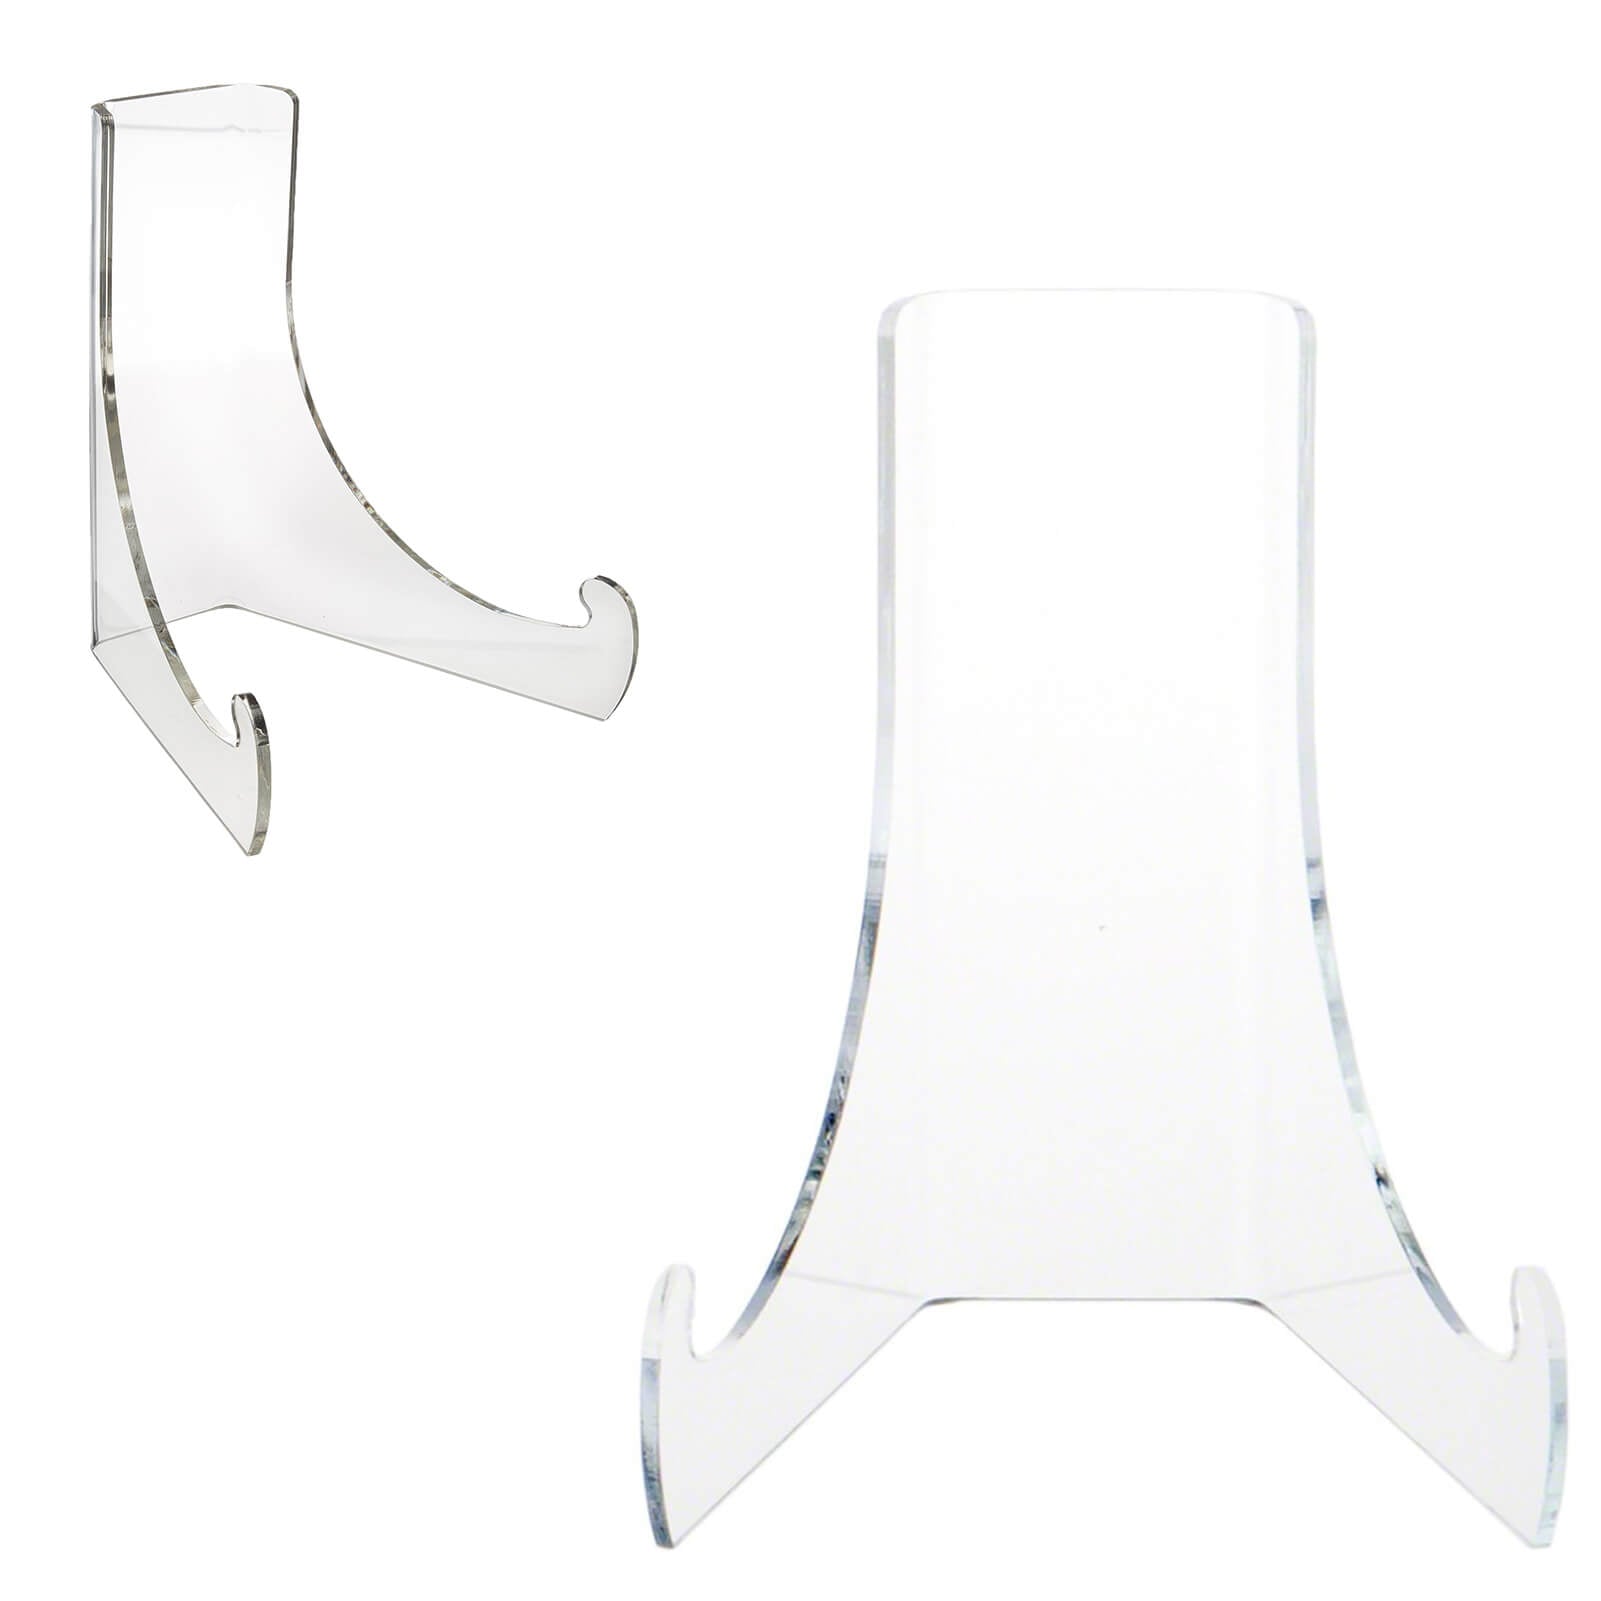 Acrylic Book Stands, Holders, Display Stands, Product Holders